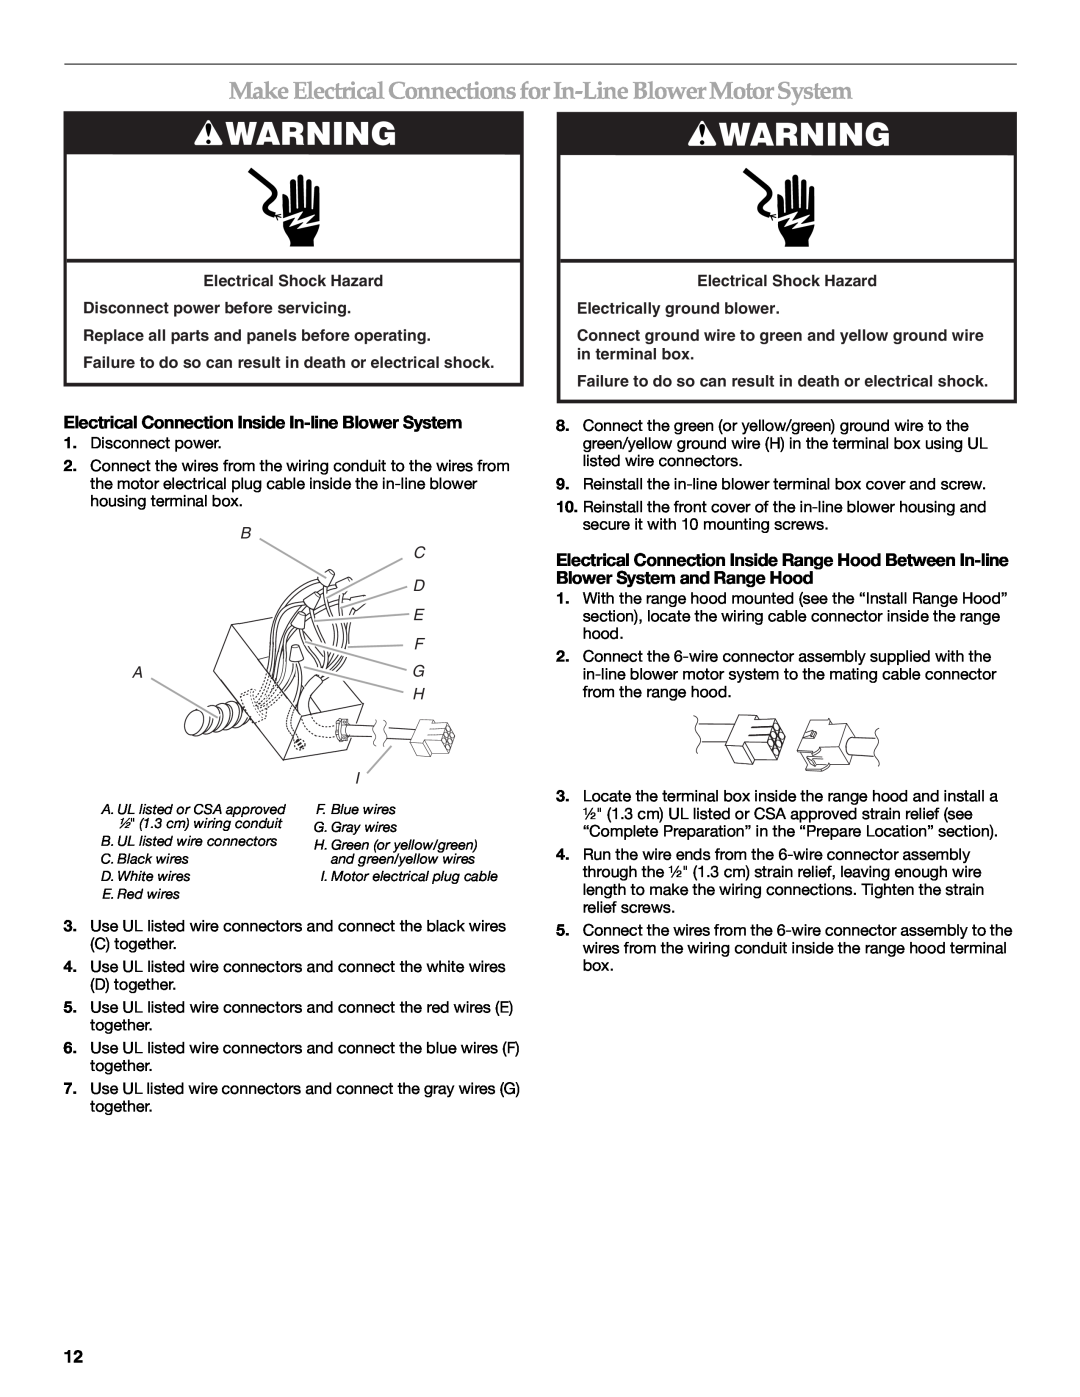 KitchenAid W10331007B installation instructions MakeElectrical Connectionsfor In-Line BlowerMotor System, C D E F G H I 